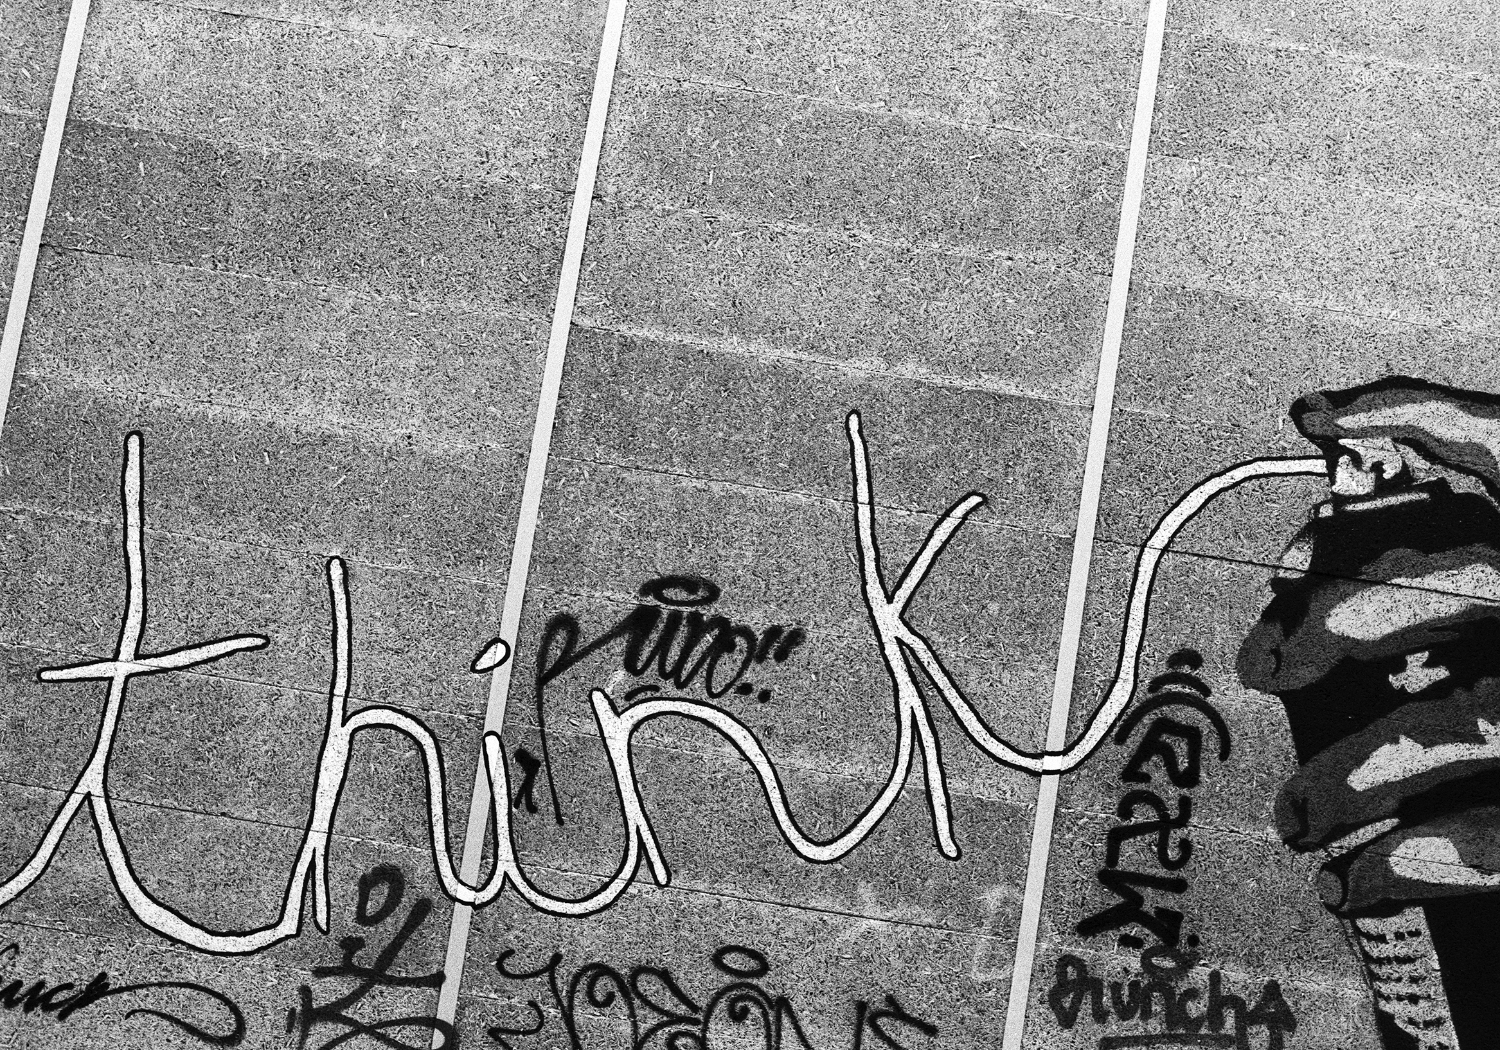 Graffiti with words "think" on the wall, and the words are coming from a spray can.